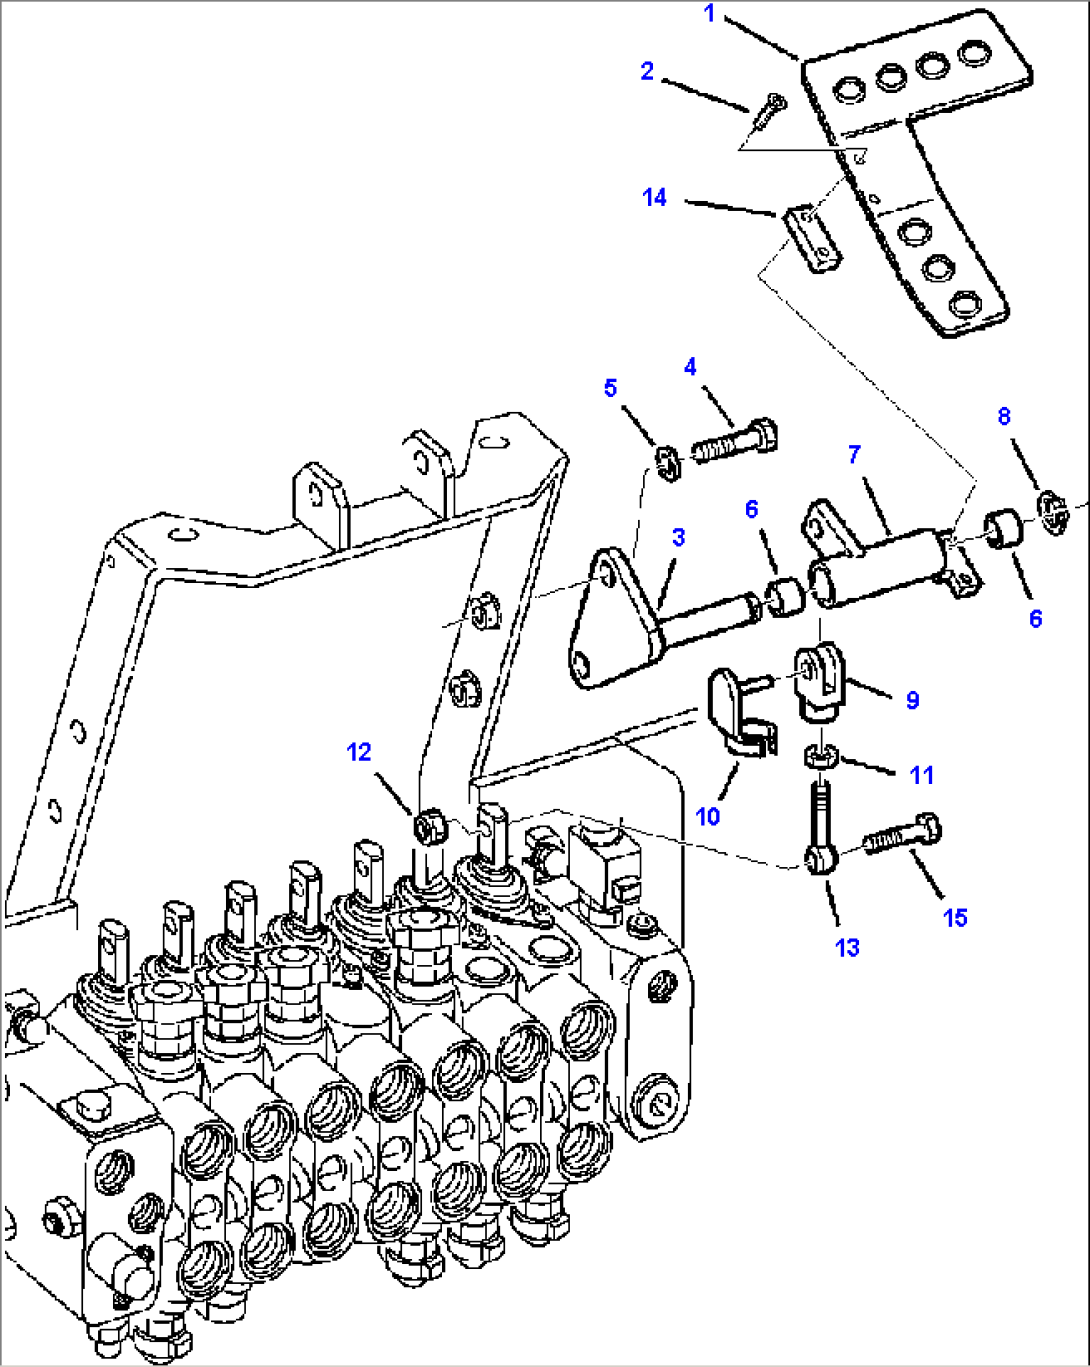 FIG. K4520-01A0 RIGHT BACKHOE CONTROL PEDAL - EXCAVATOR STYLE